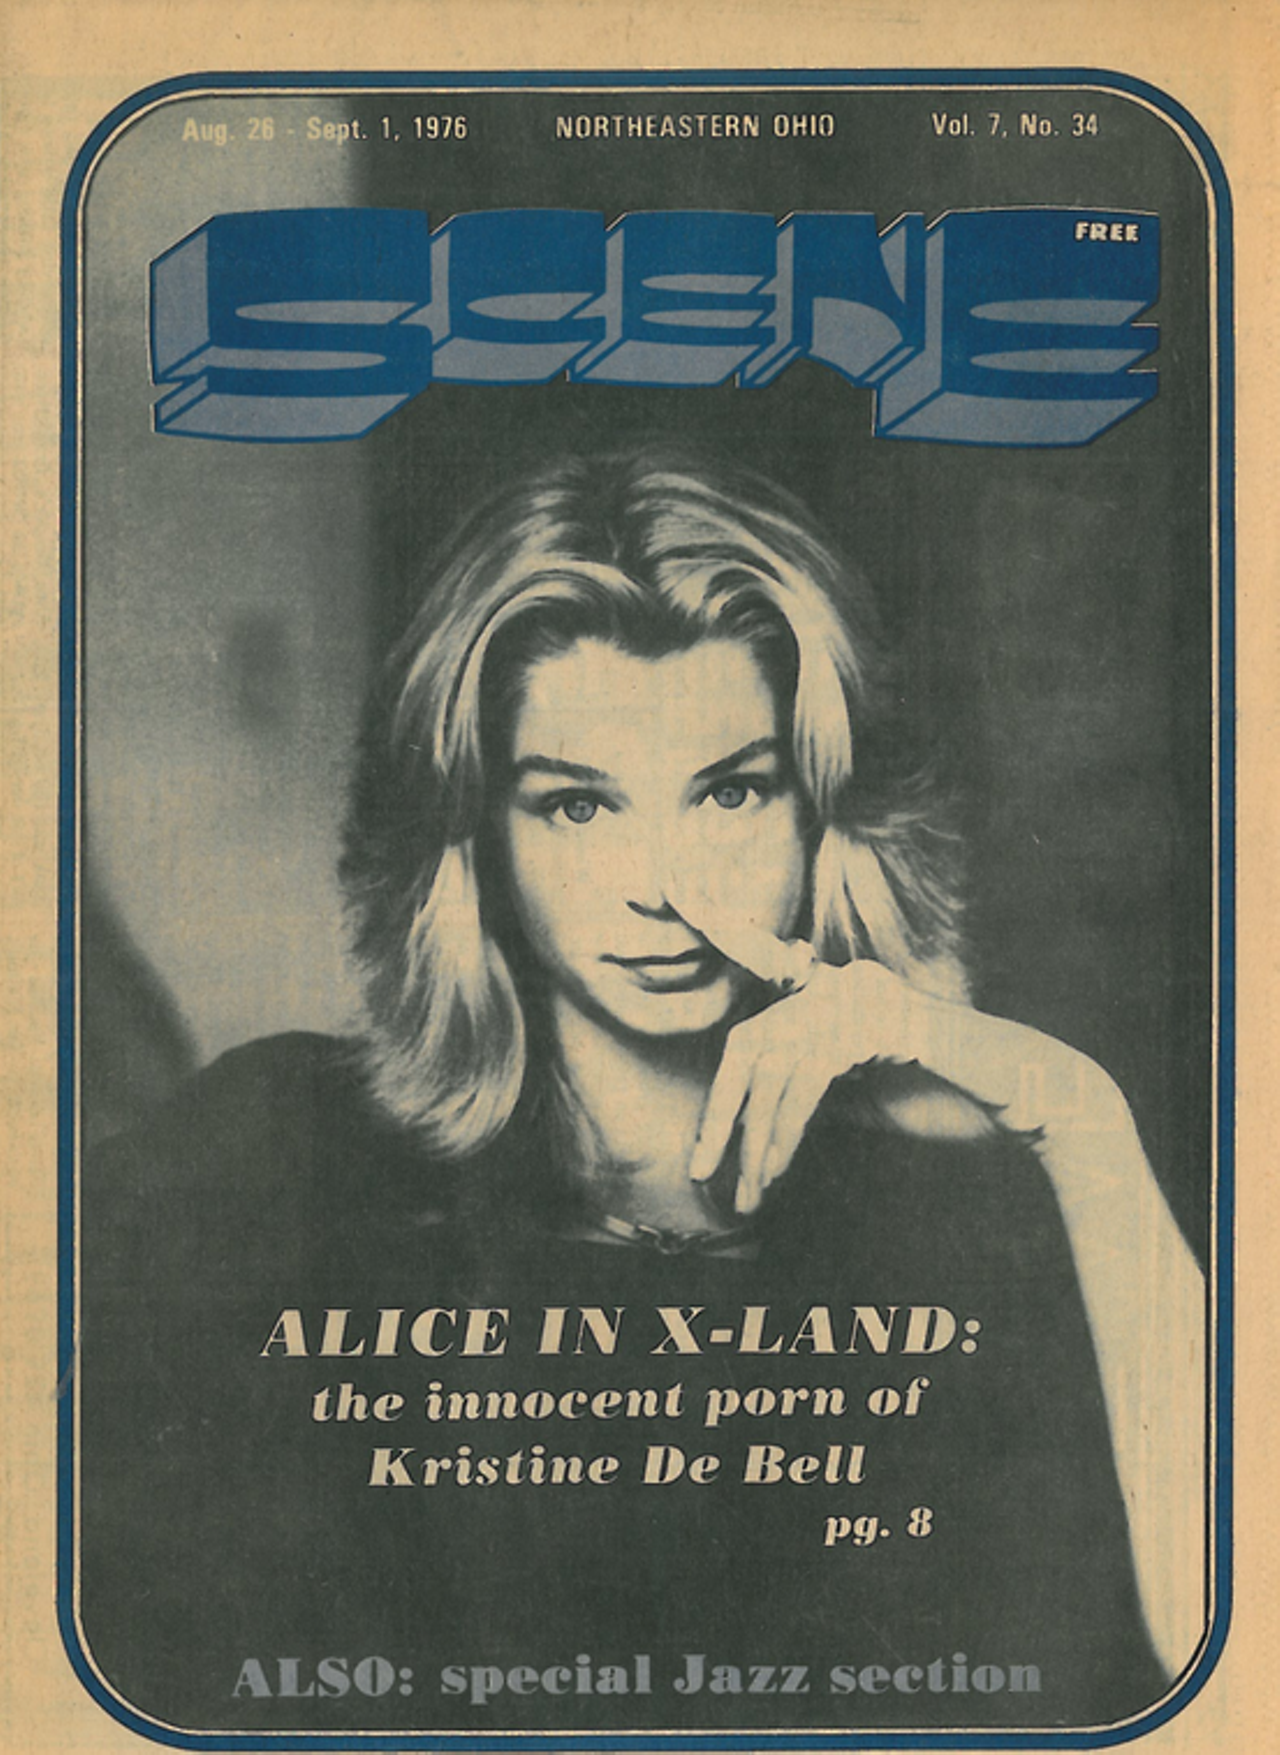 "Alice in X-Land: the innocent porn of Kristine DeBell," 1976.